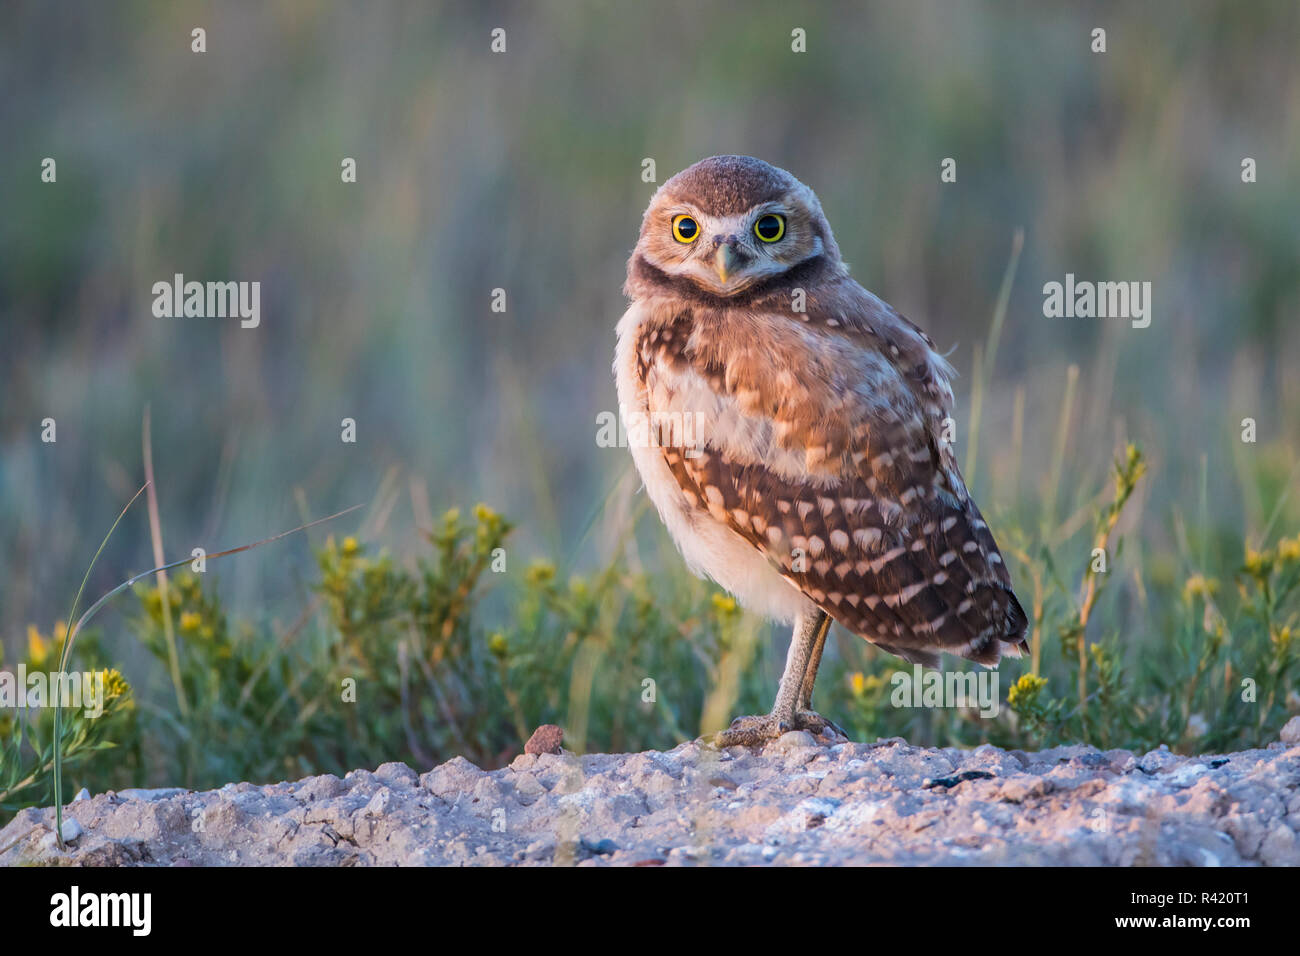 USA, Wyoming, Sublette County. Young Burrowing Owl standing at the edge of it's burrow awaiting the return of a parent with food. Stock Photo